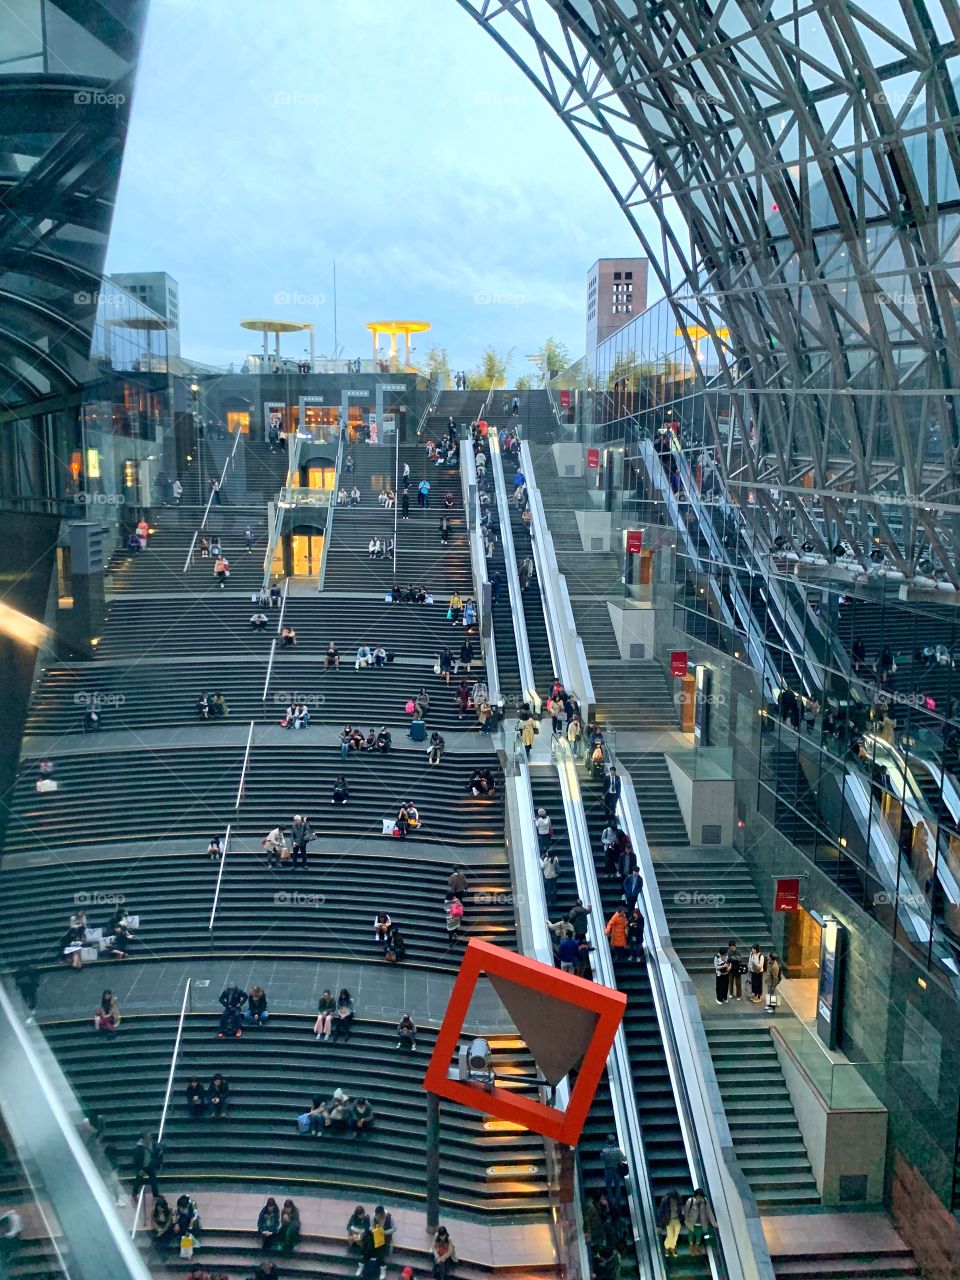 The Magnificent Kyoto Station